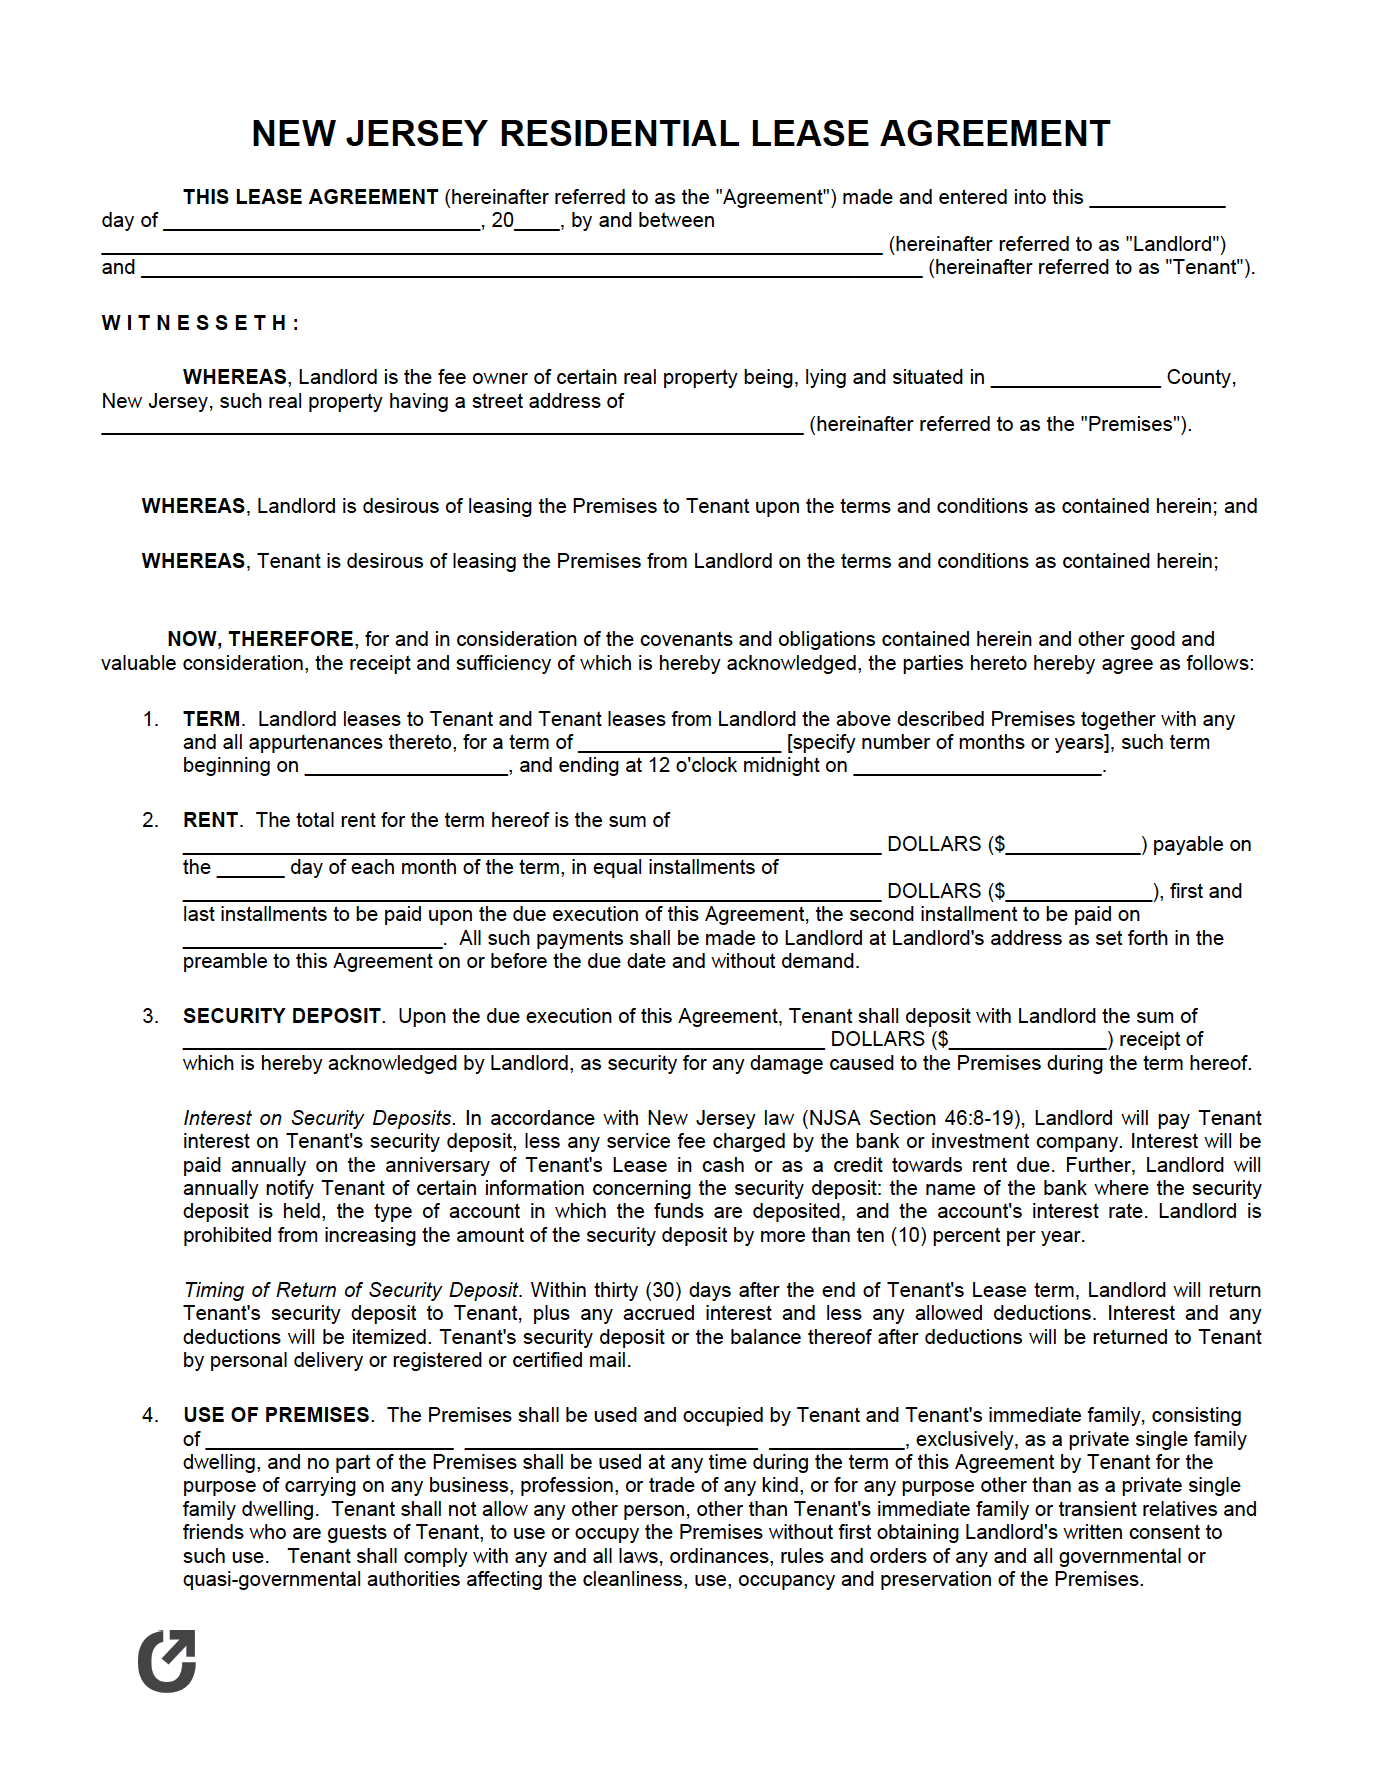 Free New Jersey Rental Lease Agreement Templates  PDF  WORD With new jersey residential lease agreement template